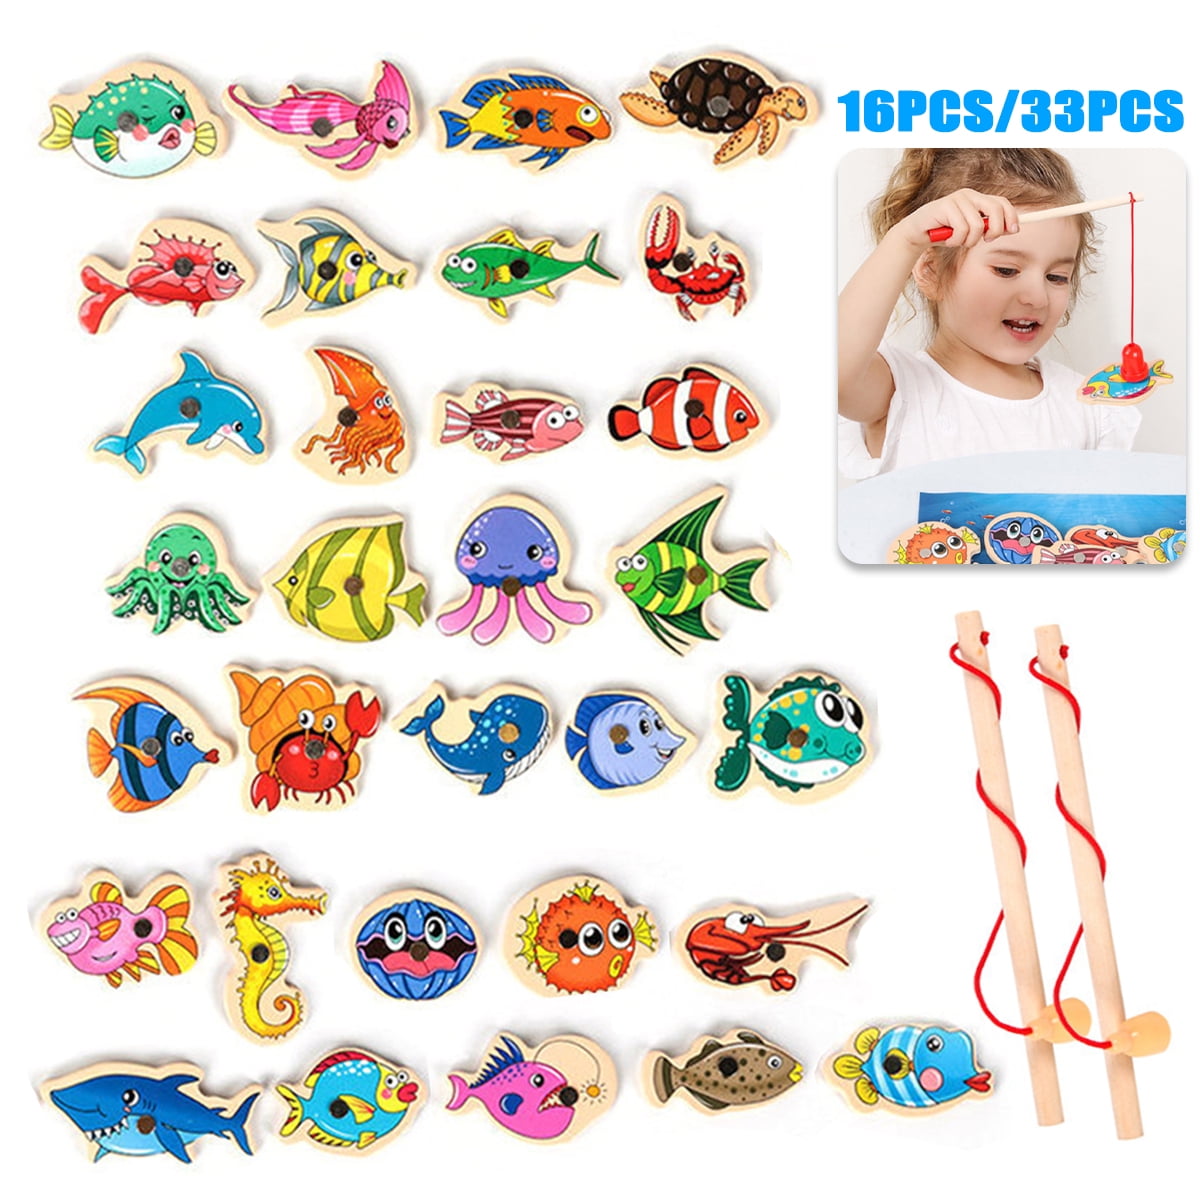 AoHao 33/16pcs Wooden Magnetic Fishing Game Toys Set with Fish Rod  Parent-child Interactive Early Educational Toy for Kids Toddlers Christmas  Gift